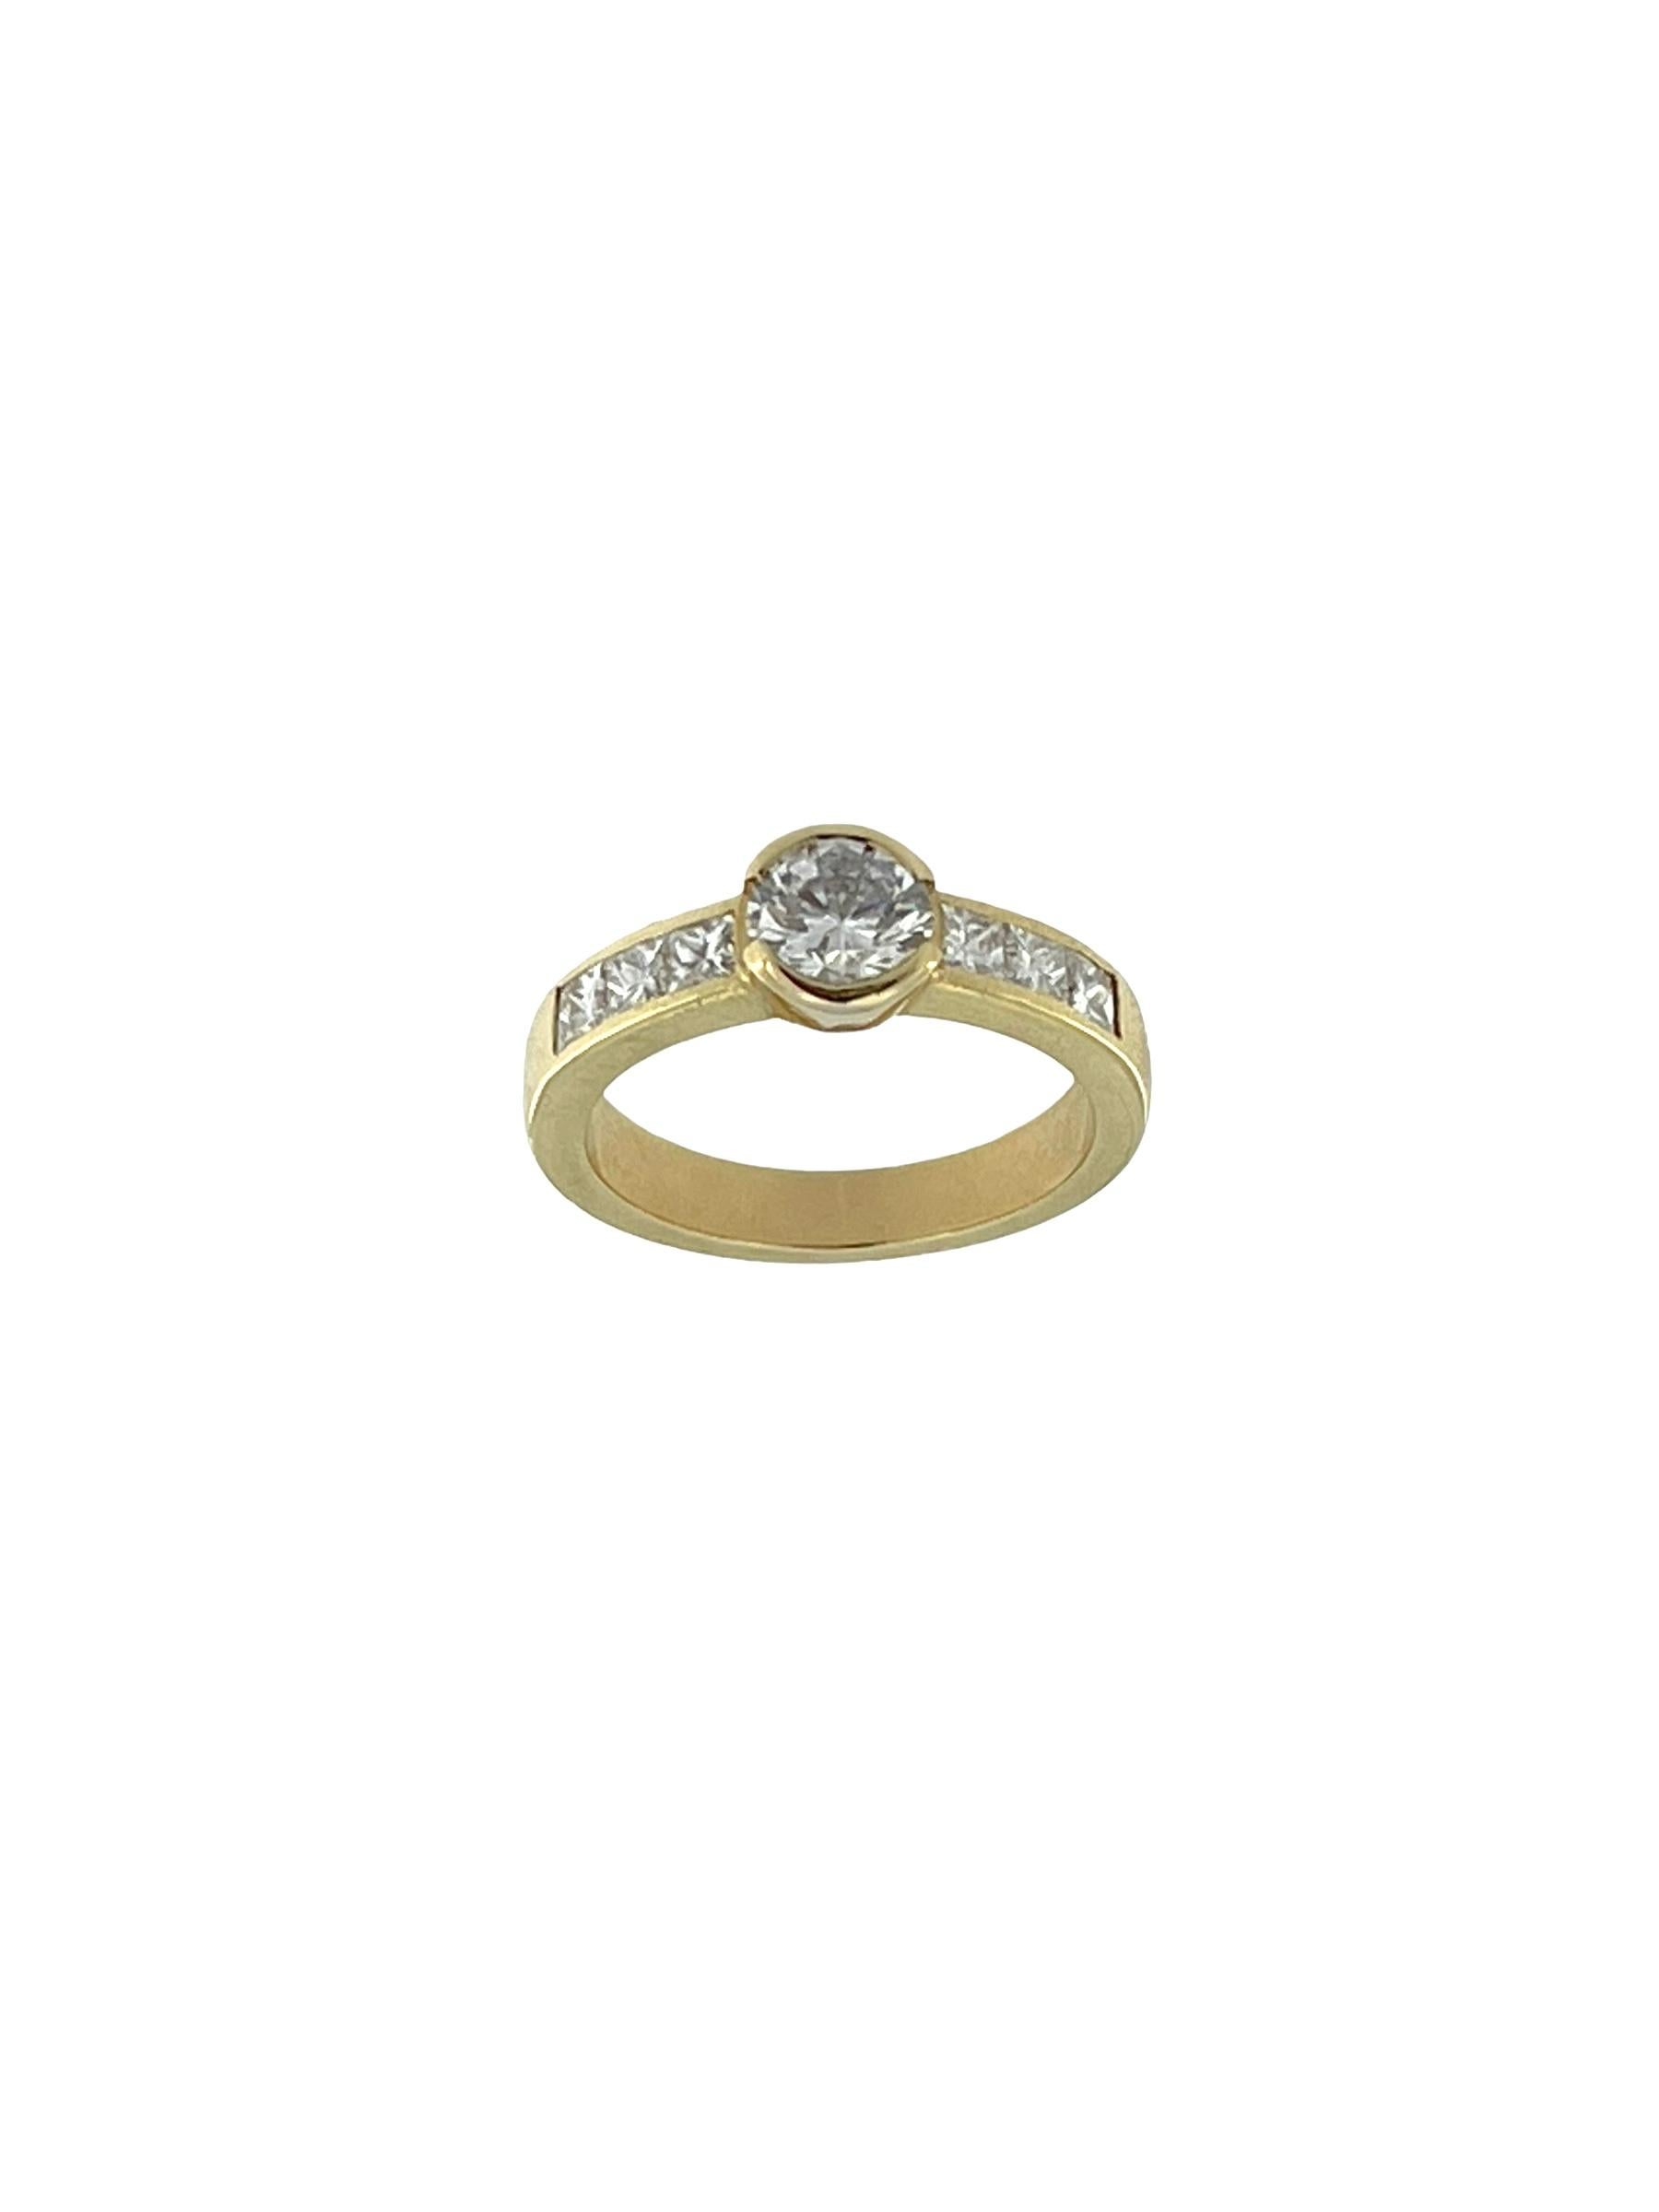 Modern HRD Certified Yellow Gold Ring with 1.30ct Diamonds For Sale